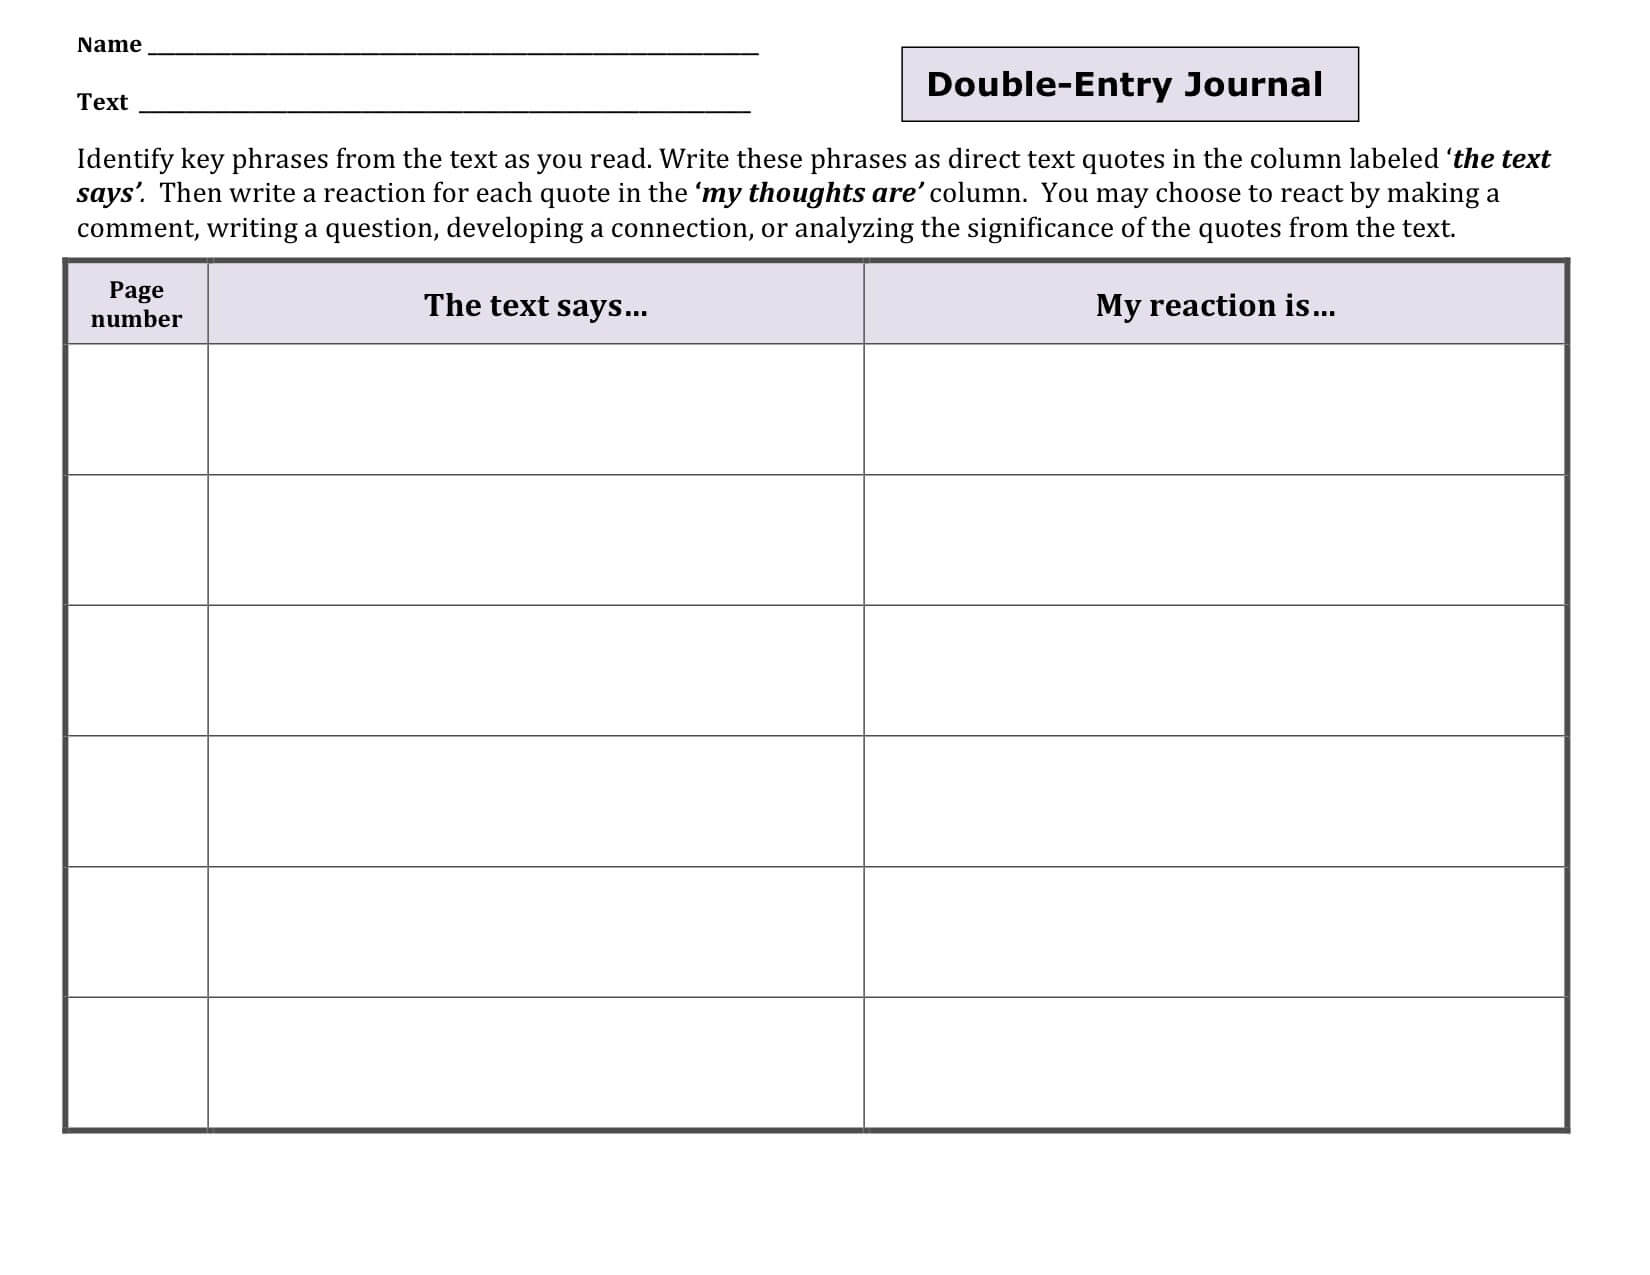 Content Specific Literacy: Focusing On Comprehension Intended For Double Entry Journal Template For Word